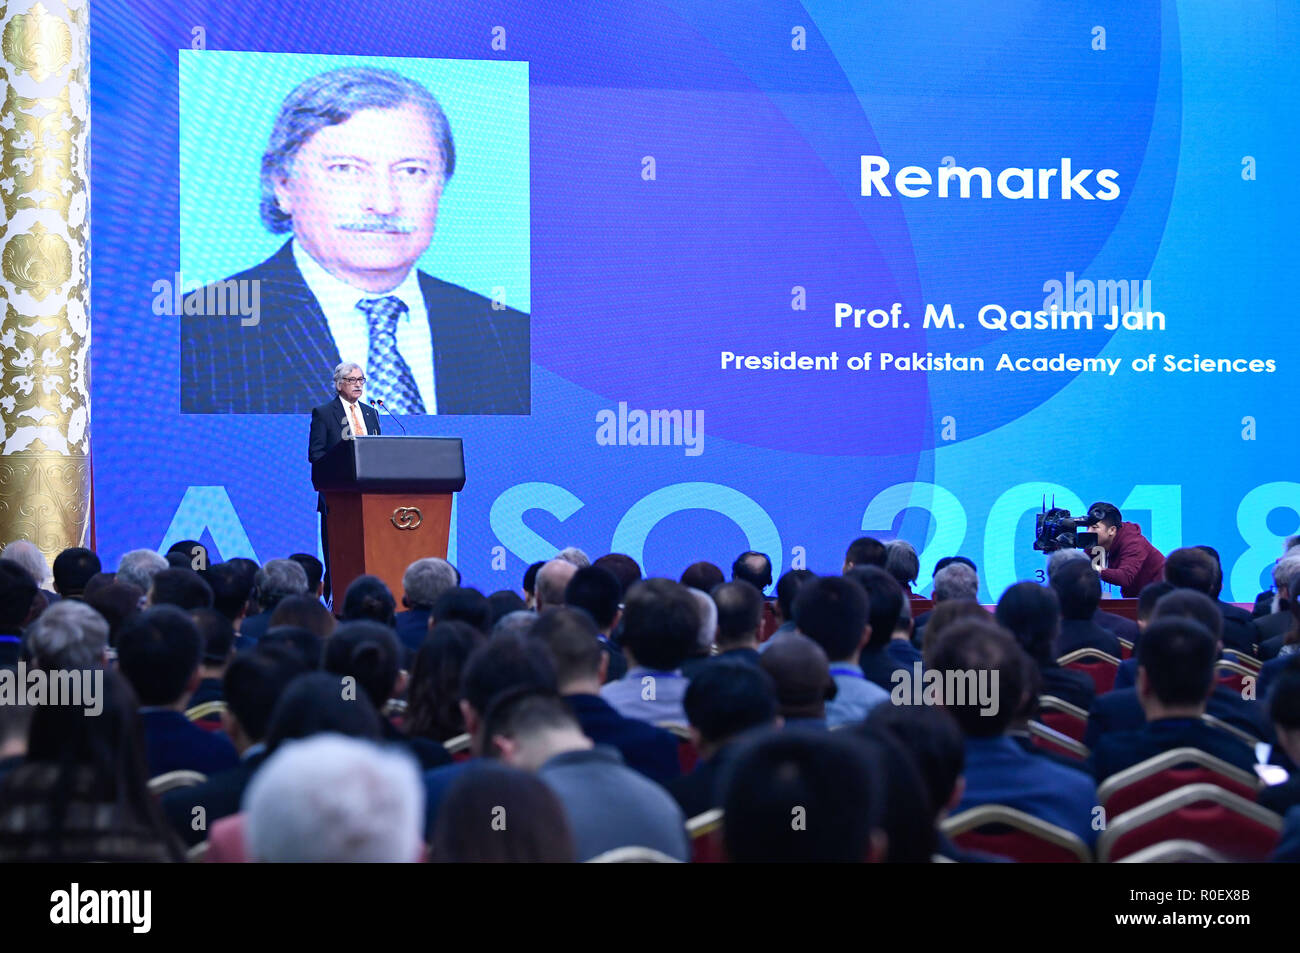 Beijing, China. 4th Nov, 2018. Prof. M. Qasim Jan, president of Pakistan Academy of Sciences, delivers a speech at the launching ceremony of the first general assembly of the Alliance of International Science Organizations (ANSO) in the Belt and Road region and the opening of the second international science forum of scientific organizations on the Belt and Road initiative held in Beijing, capital of China, on Nov. 4, 2018. Credit: Shen Hong/Xinhua/Alamy Live News Stock Photo